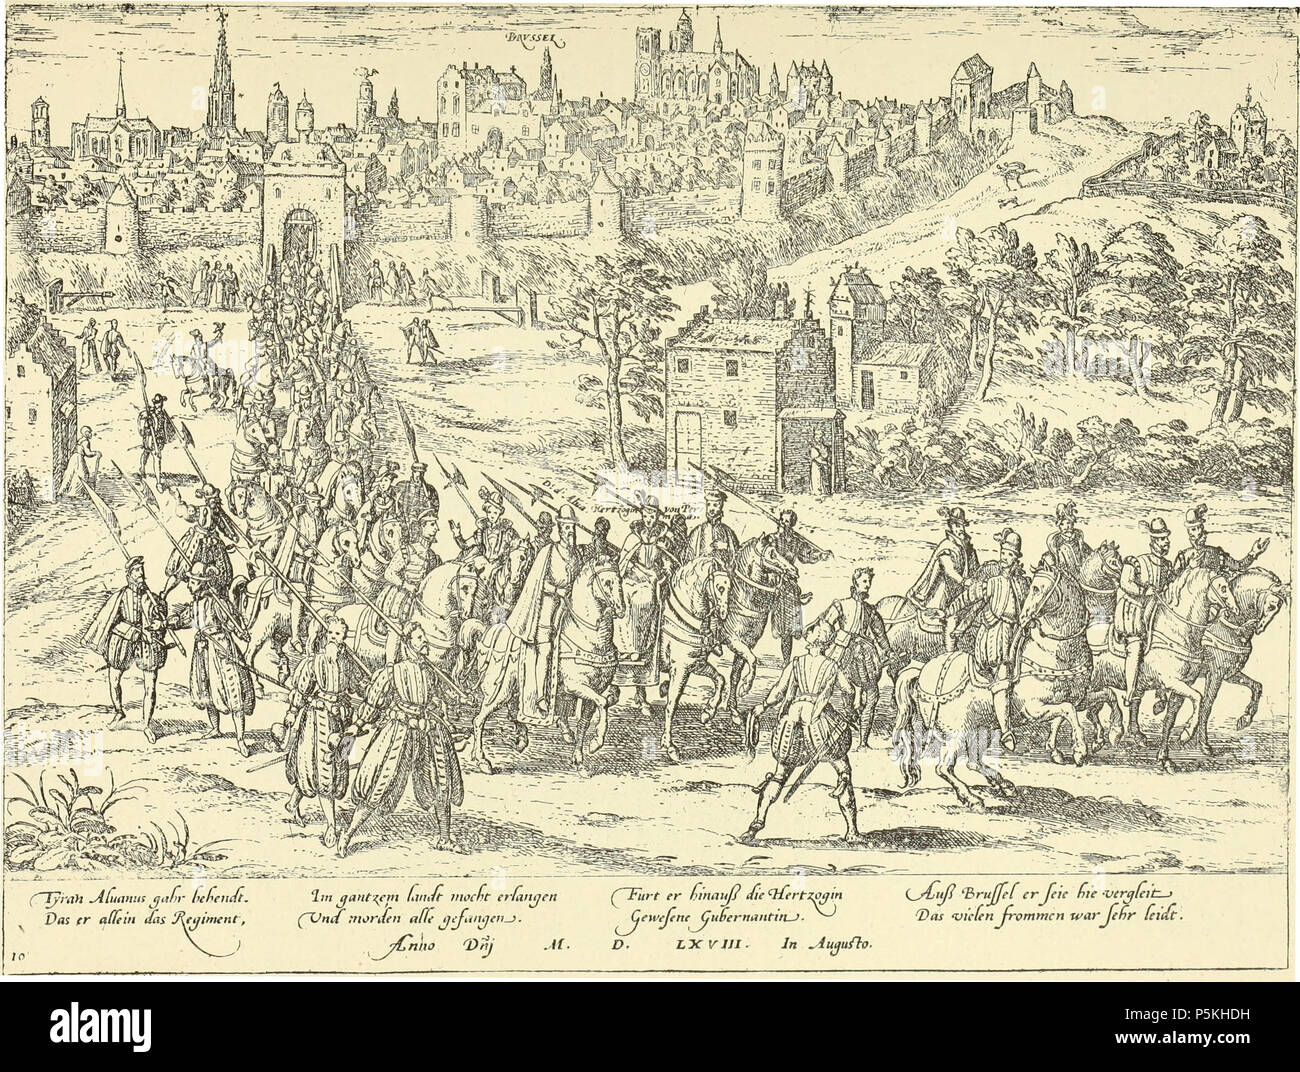 N/A. English: The Duke of Alba conducts Margaret of Parma out of Brussels (august 1568). Engraving by Frans Hogenberg, reproduced in 'Bruxelles à travers les âges' (1884) . 17 August 2015.   Frans Hogenberg  (before 1540–1590)    Alternative names Franz Hogenberg, Frans Hogenbergh, Frans Hogenberch  Description Flemish engraver and cartographer  Date of birth/death before 1540 1590  Location of birth/death Mechelen Cologne  Work period 1568-1588  Work location Antwerp (1568), London (1568), Cologne (1570-1585), Hamburg (1585-1588), Denmark (1588)  Authority control  : Q959748 VIAF:100197099 IS Stock Photo